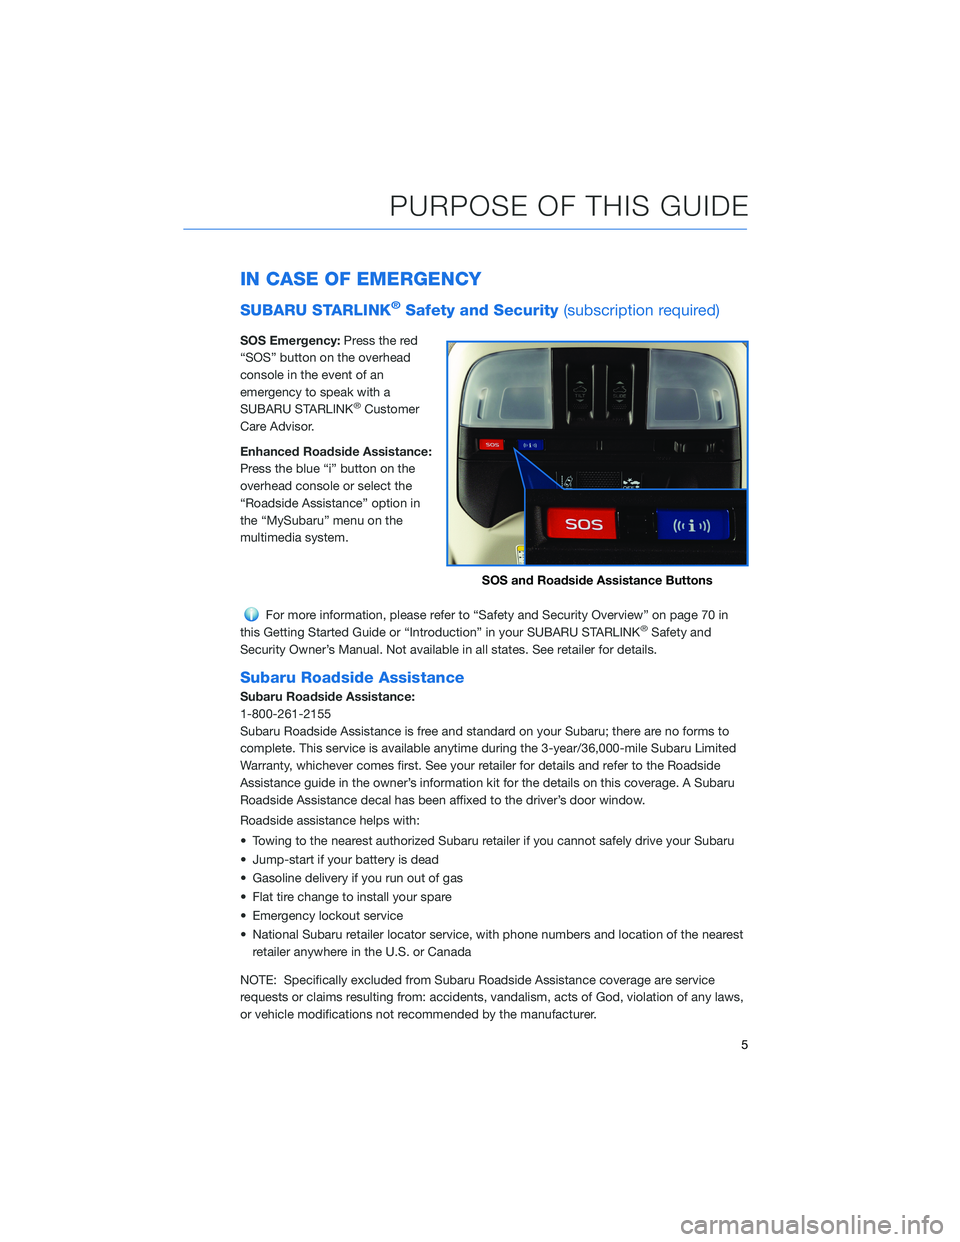 SUBARU IMPREZA 2022  Getting Started Guide IN CASE OF EMERGENCY
SUBARU STARLINK®Safety and Security(subscription required)
SOS Emergency:Press the red
“SOS” button on the overhead
console in the event of an
emergency to speak with a
SUBAR